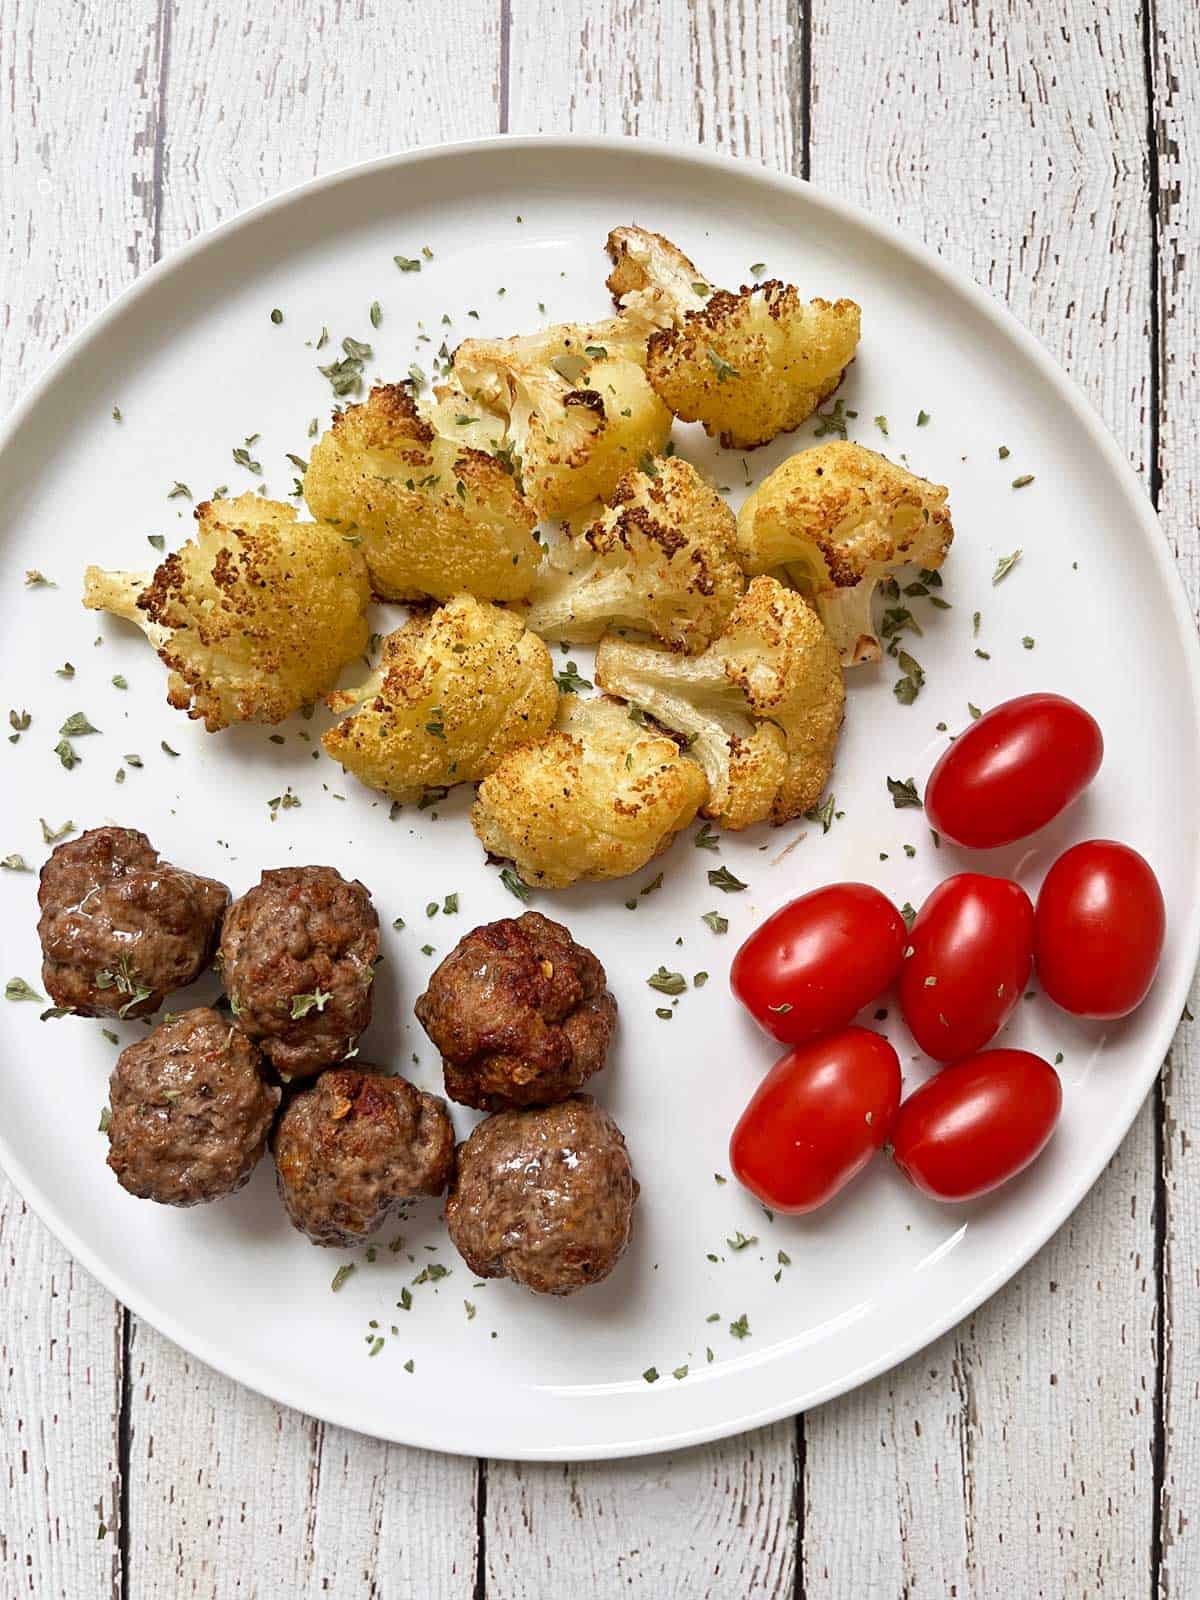 Keto meatballs are served with roasted cauliflower and tomatoes.